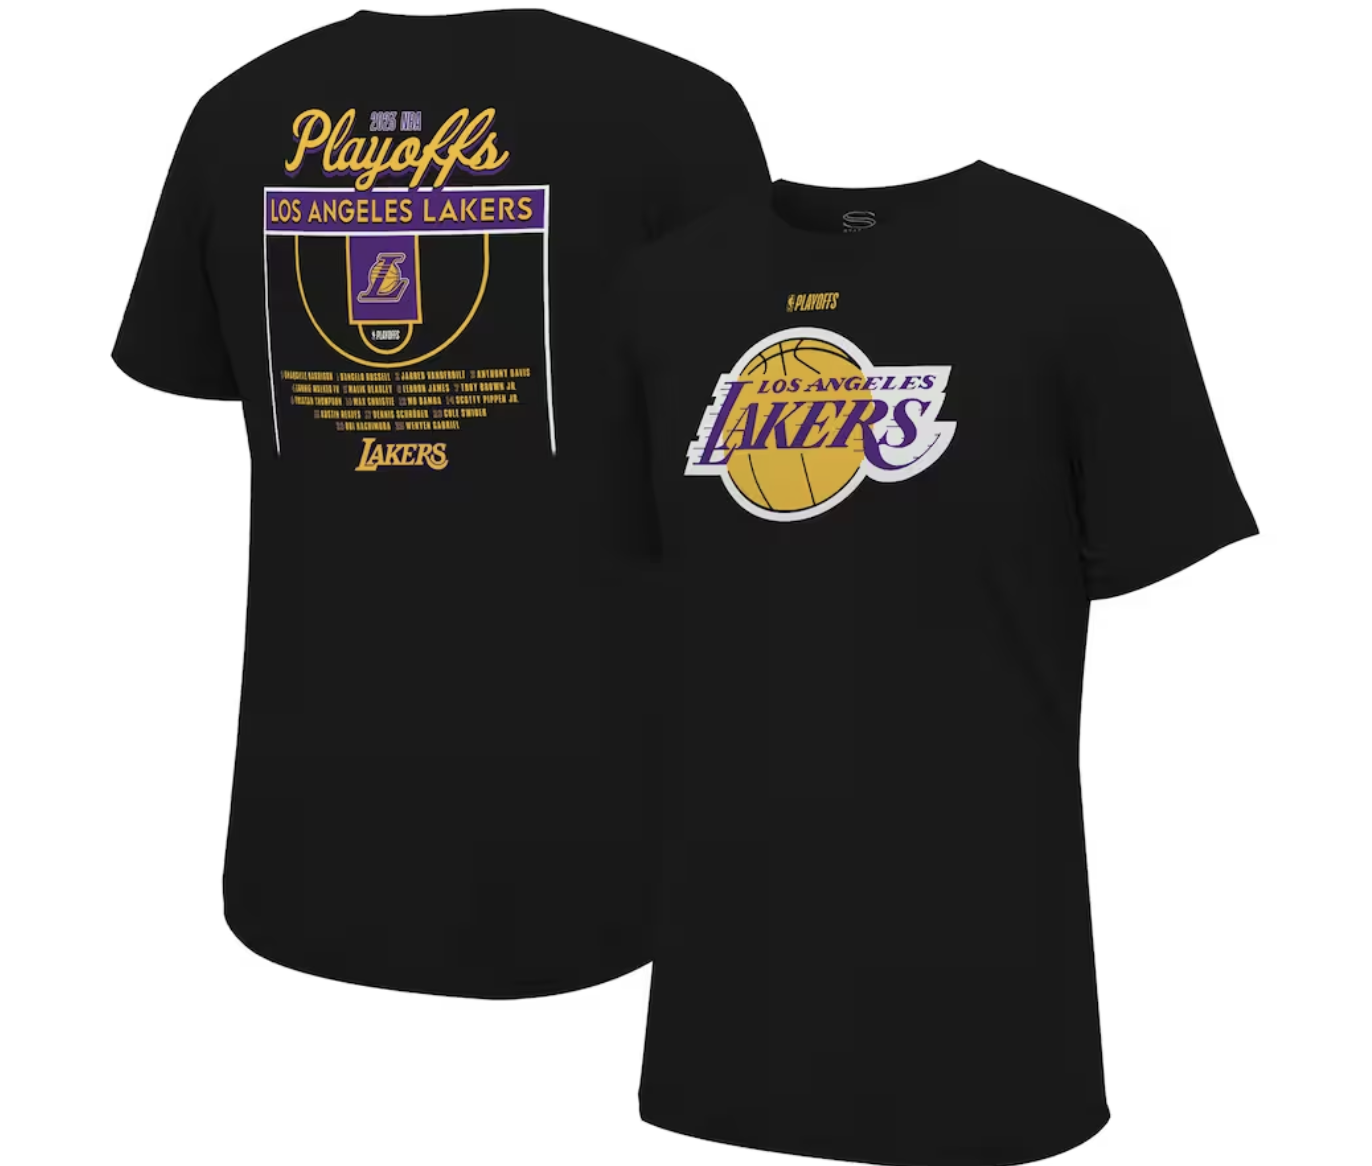 LA Lakers playoffs gear: Where to buy shirts, hats online after